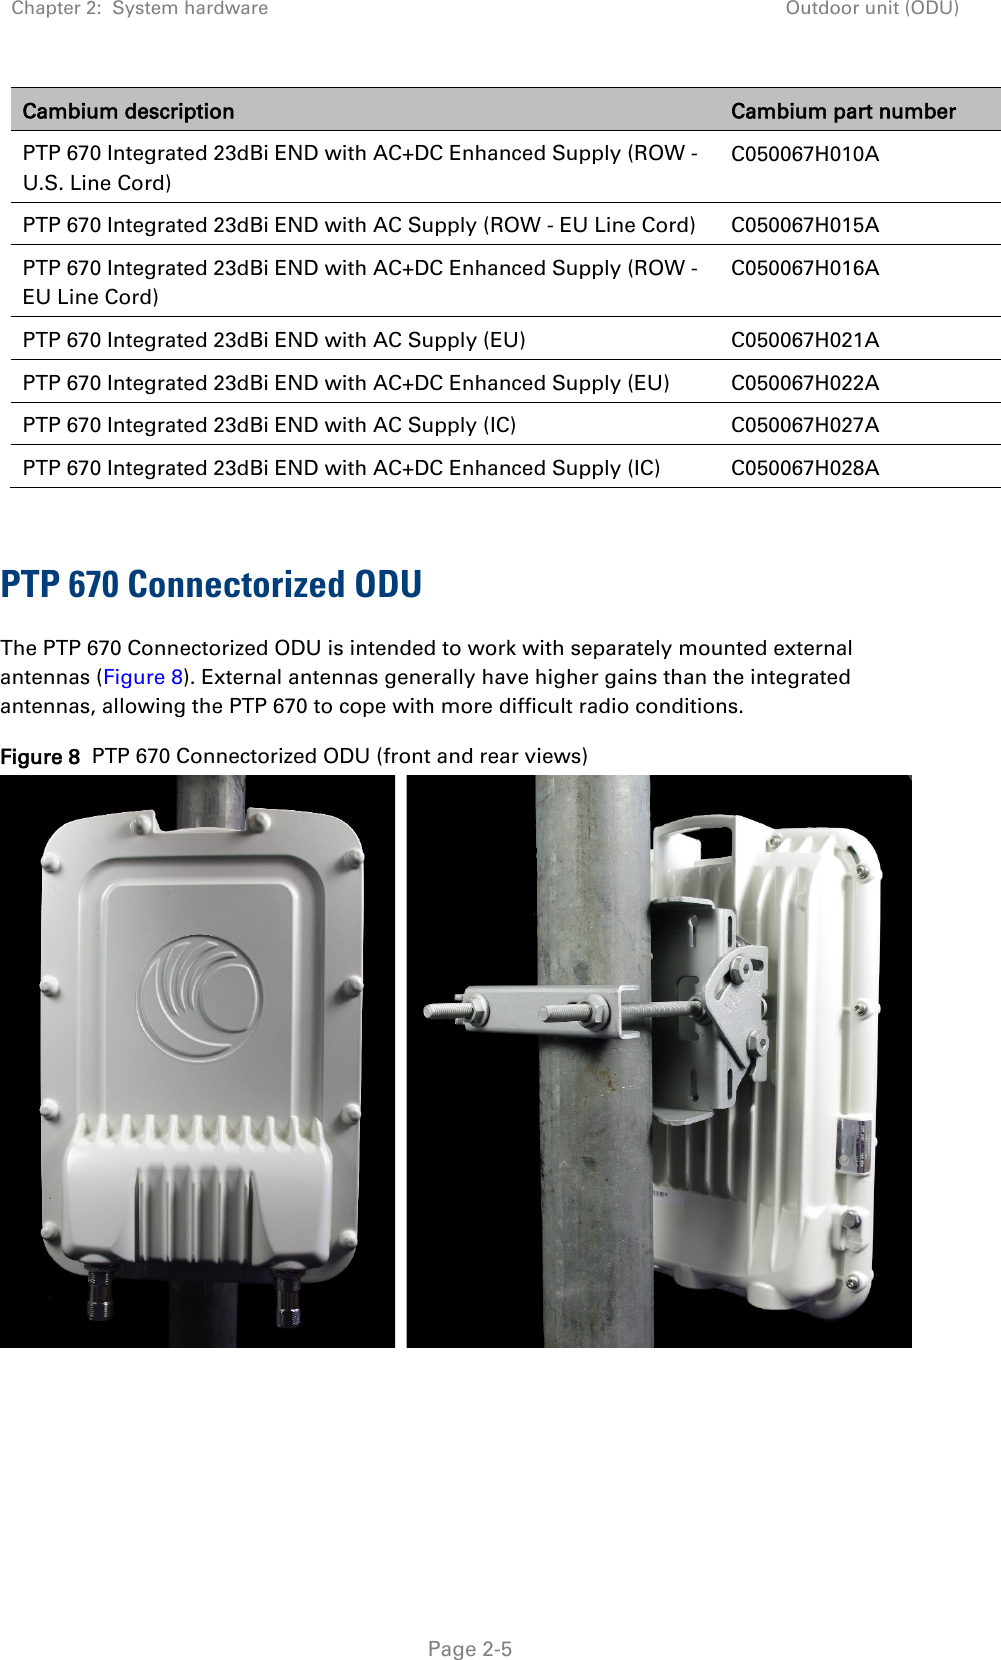 Chapter 2:  System hardware Outdoor unit (ODU)   Page 2-5 Cambium description Cambium part number PTP 670 Integrated 23dBi END with AC+DC Enhanced Supply (ROW - U.S. Line Cord) C050067H010A PTP 670 Integrated 23dBi END with AC Supply (ROW - EU Line Cord) C050067H015A PTP 670 Integrated 23dBi END with AC+DC Enhanced Supply (ROW - EU Line Cord) C050067H016A PTP 670 Integrated 23dBi END with AC Supply (EU) C050067H021A PTP 670 Integrated 23dBi END with AC+DC Enhanced Supply (EU) C050067H022A PTP 670 Integrated 23dBi END with AC Supply (IC) C050067H027A PTP 670 Integrated 23dBi END with AC+DC Enhanced Supply (IC) C050067H028A  PTP 670 Connectorized ODU The PTP 670 Connectorized ODU is intended to work with separately mounted external antennas (Figure 8). External antennas generally have higher gains than the integrated antennas, allowing the PTP 670 to cope with more difficult radio conditions. Figure 8  PTP 670 Connectorized ODU (front and rear views)      